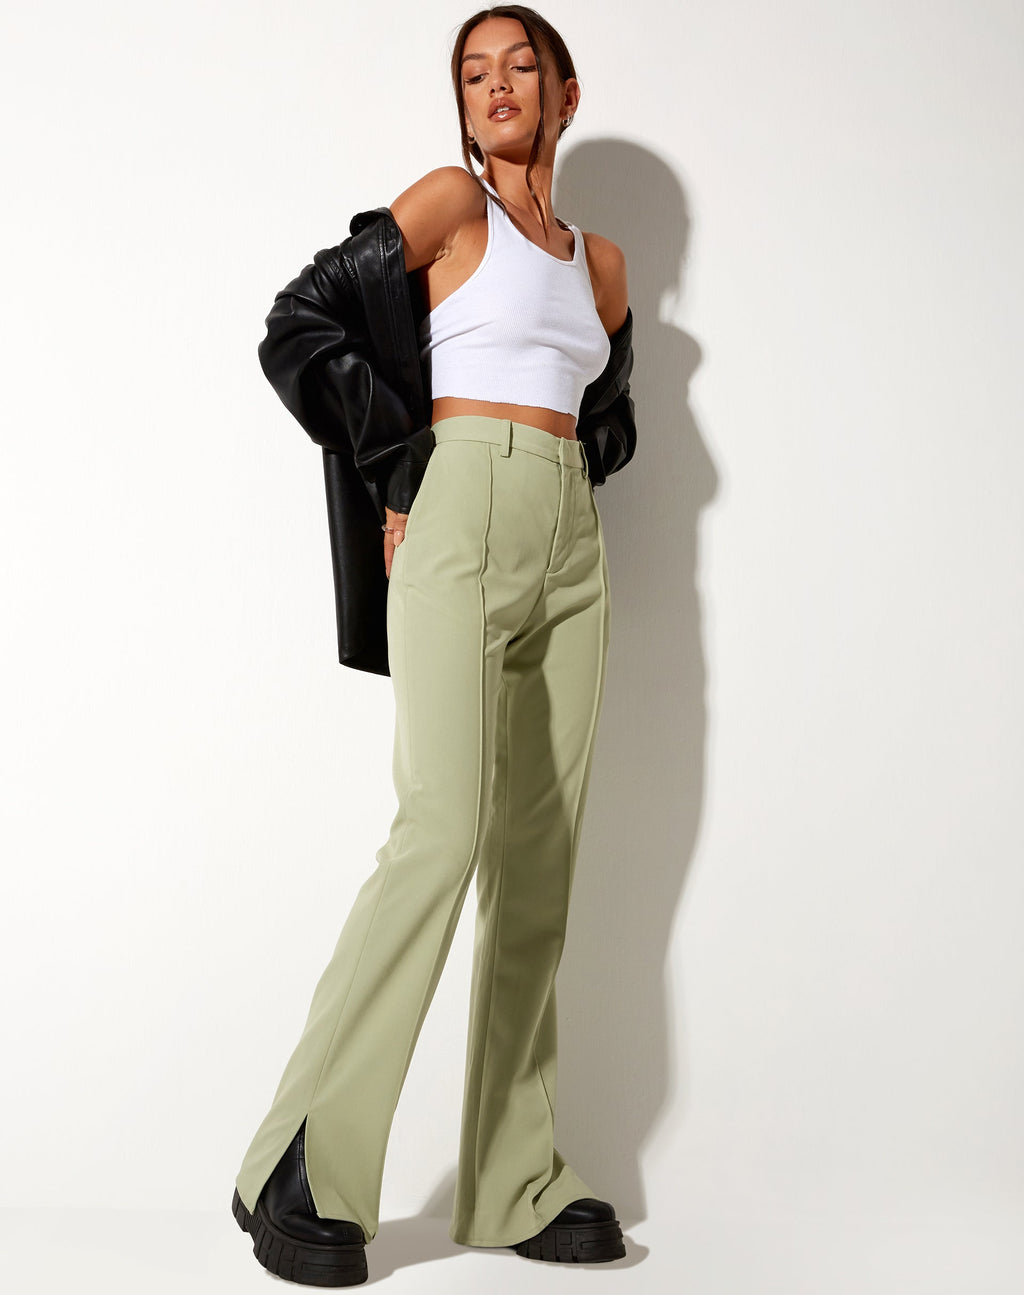 Zovey Trouser in Sage